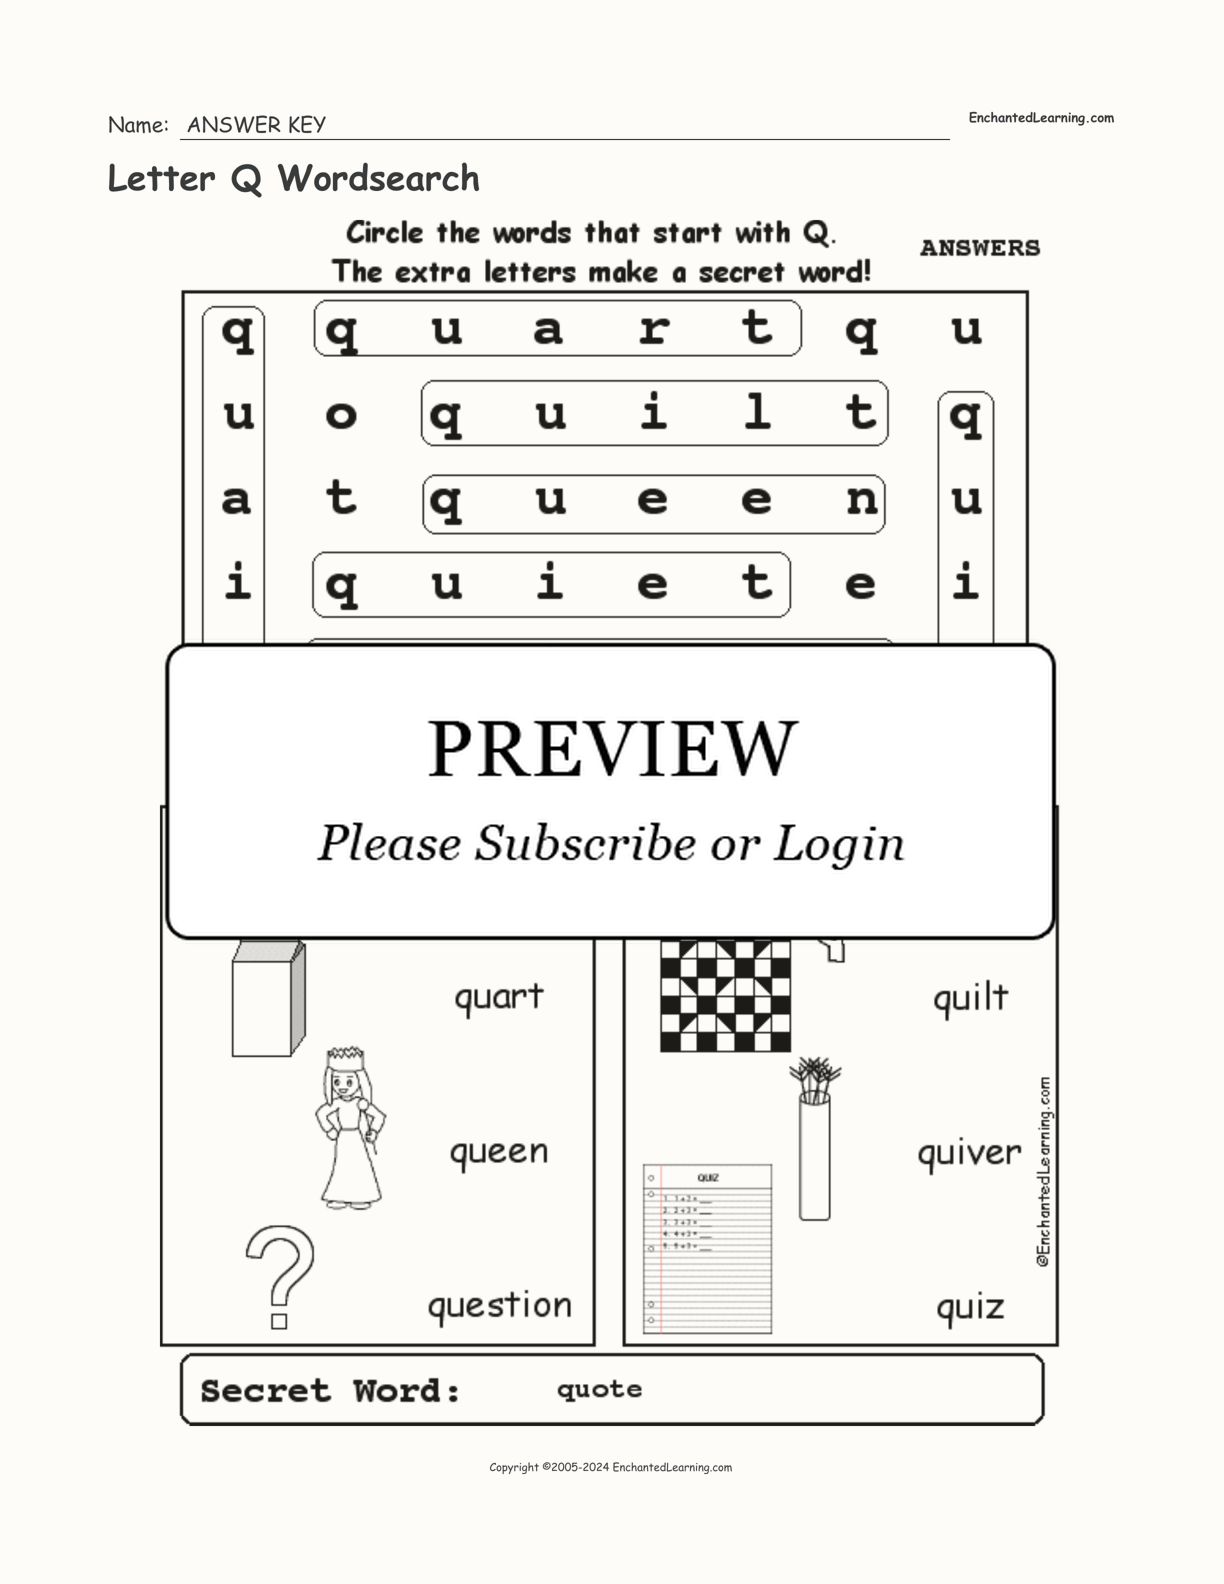 Letter Q Wordsearch interactive worksheet page 2